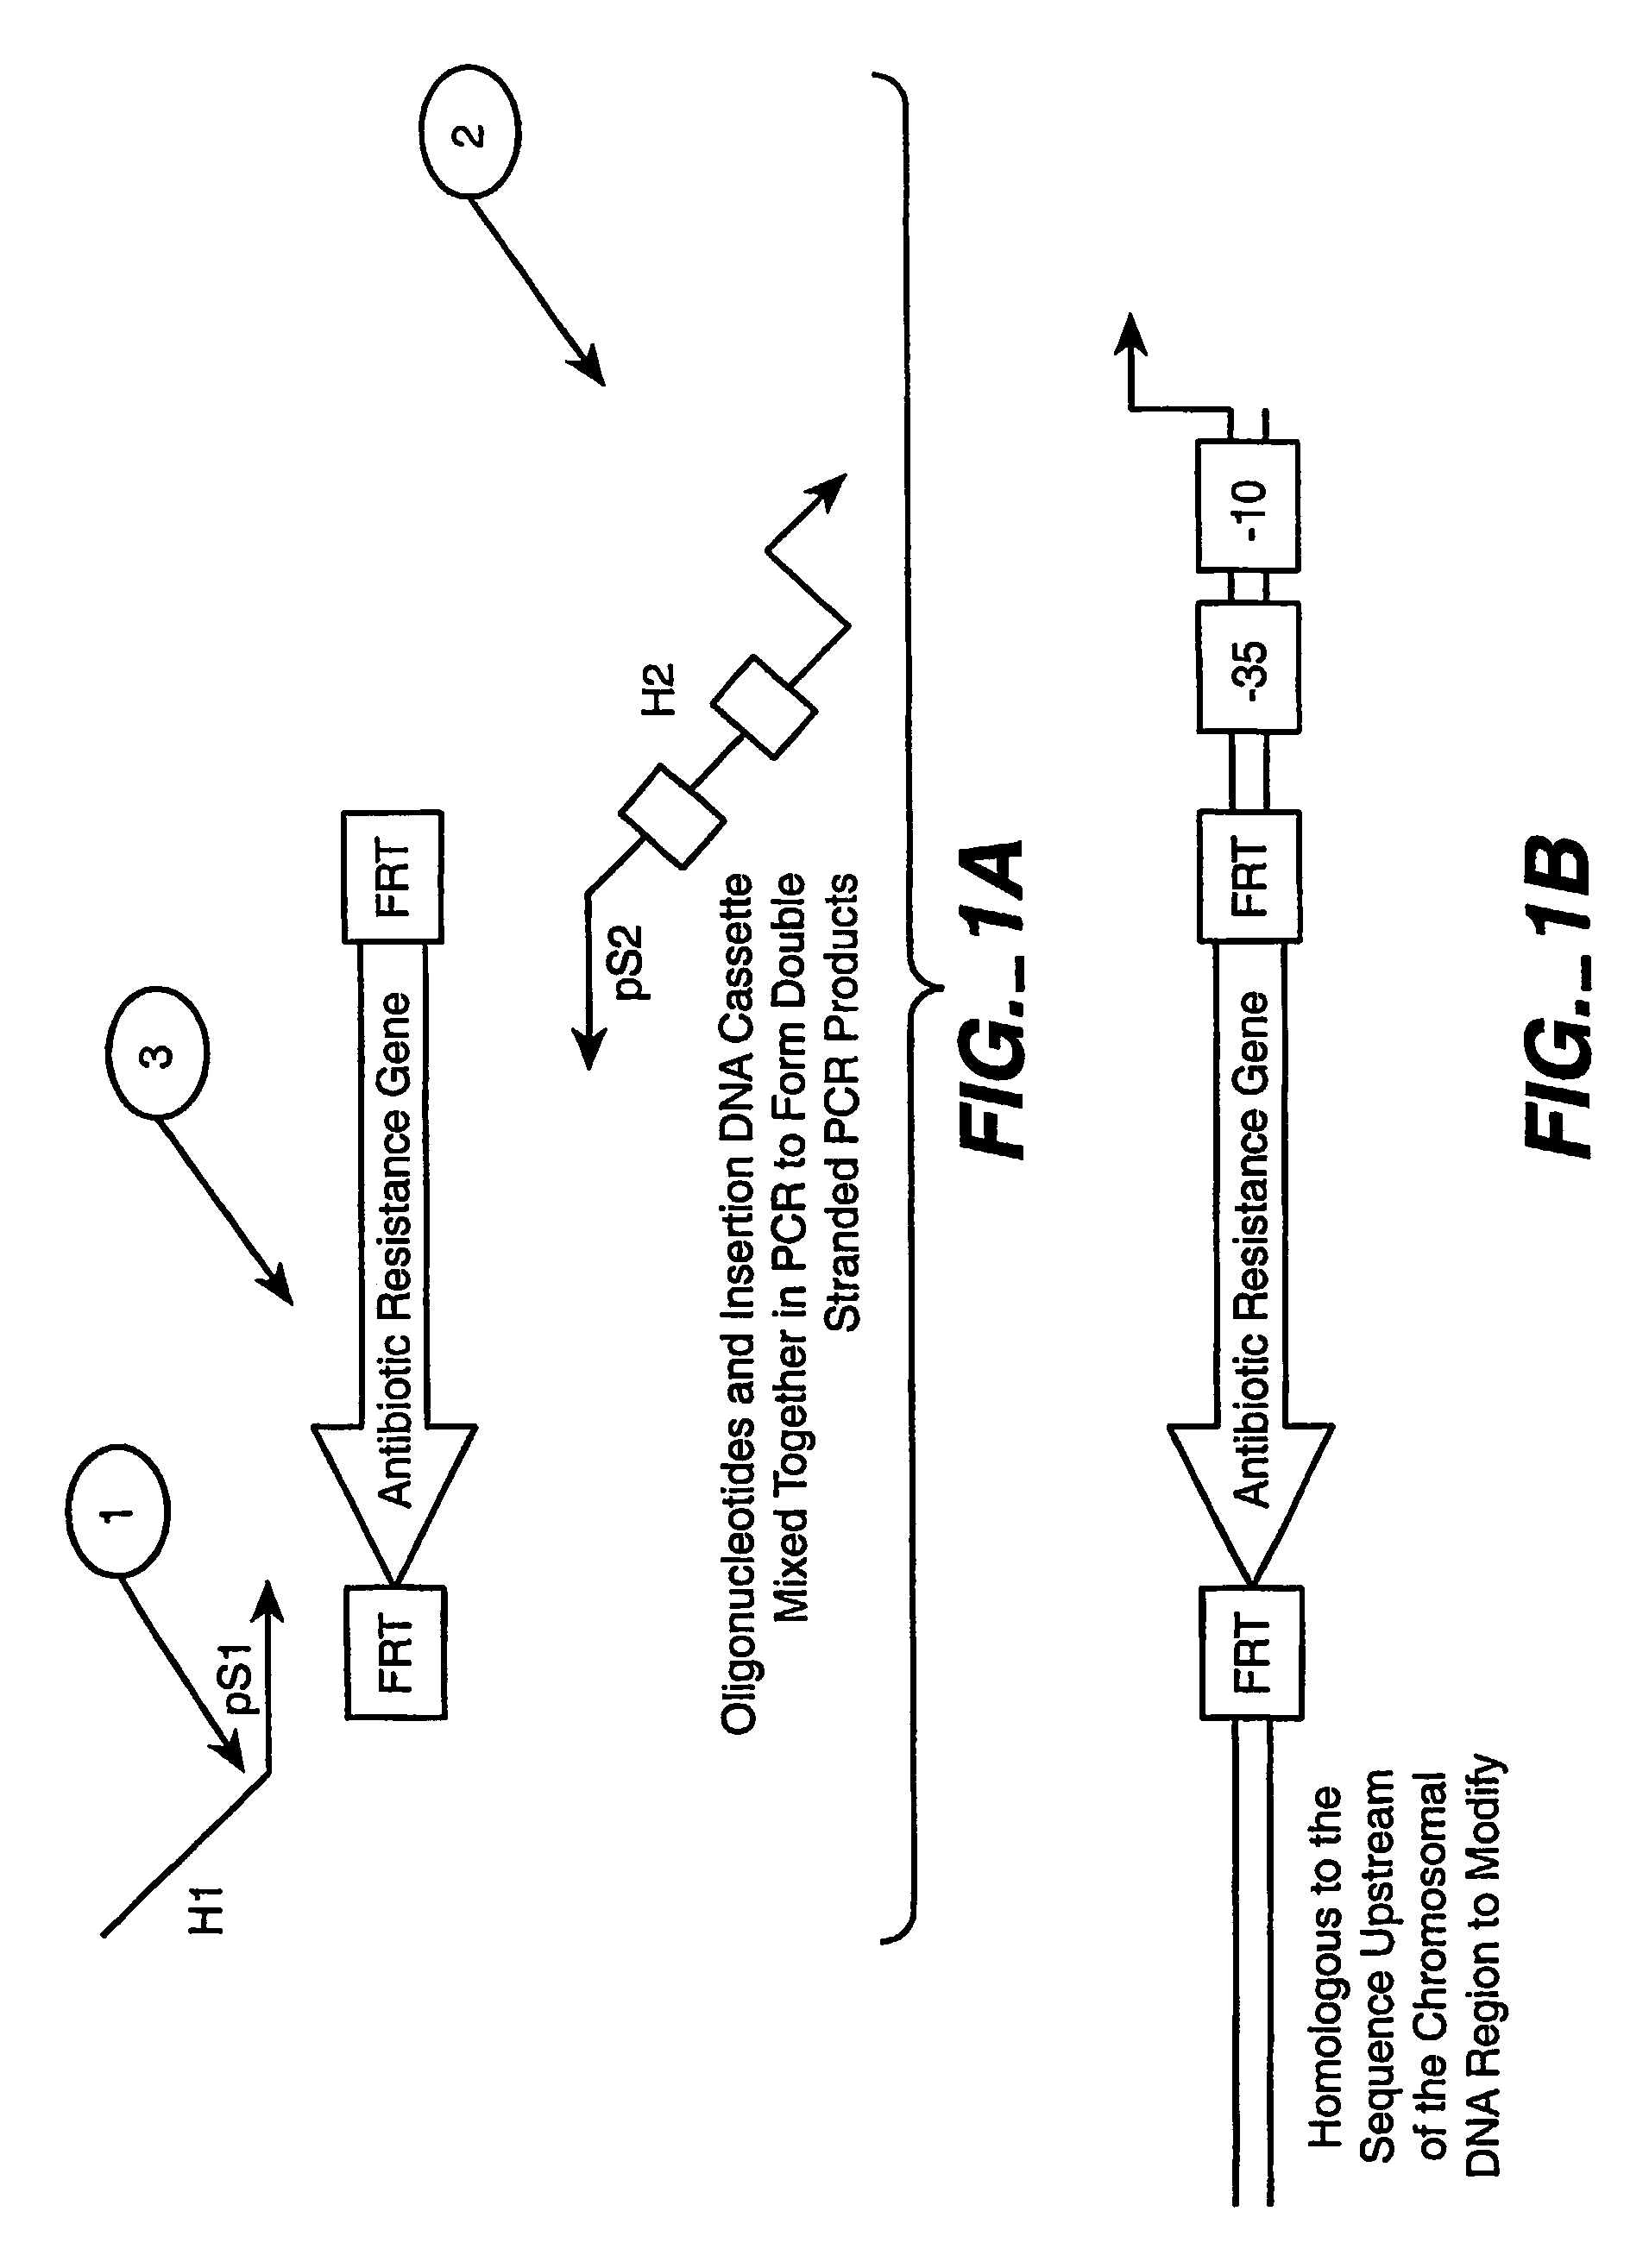 Method of creating a library of bacterial clones with varying levels of gene expression